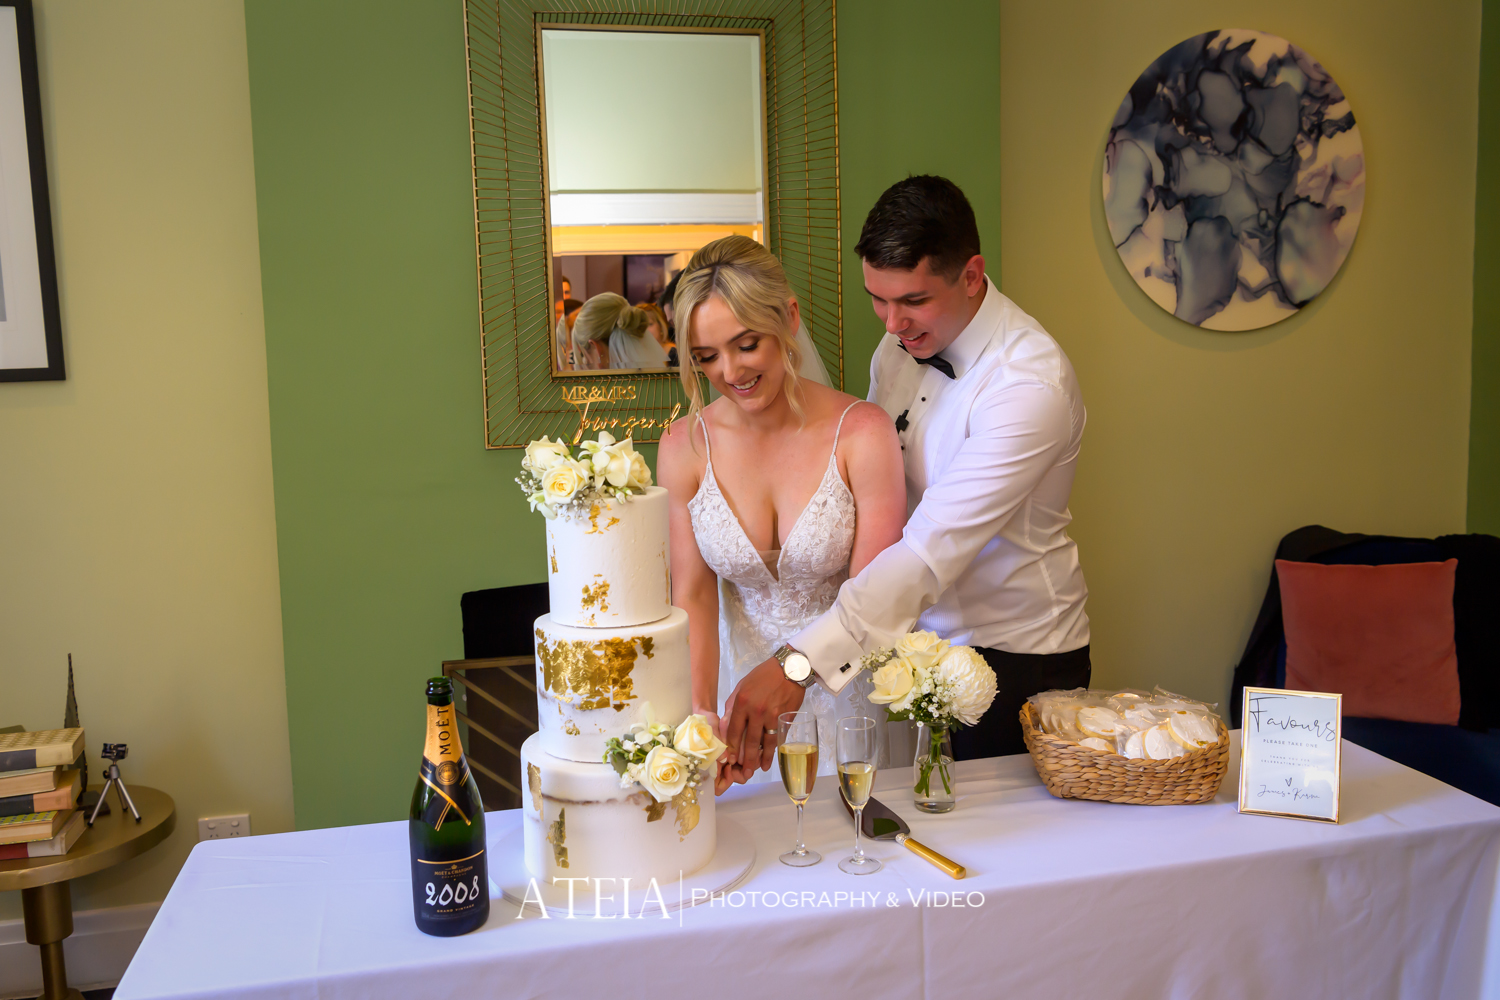 , The Garden House Wedding Photography Melbourne by ATEIA Photography &#038; Video